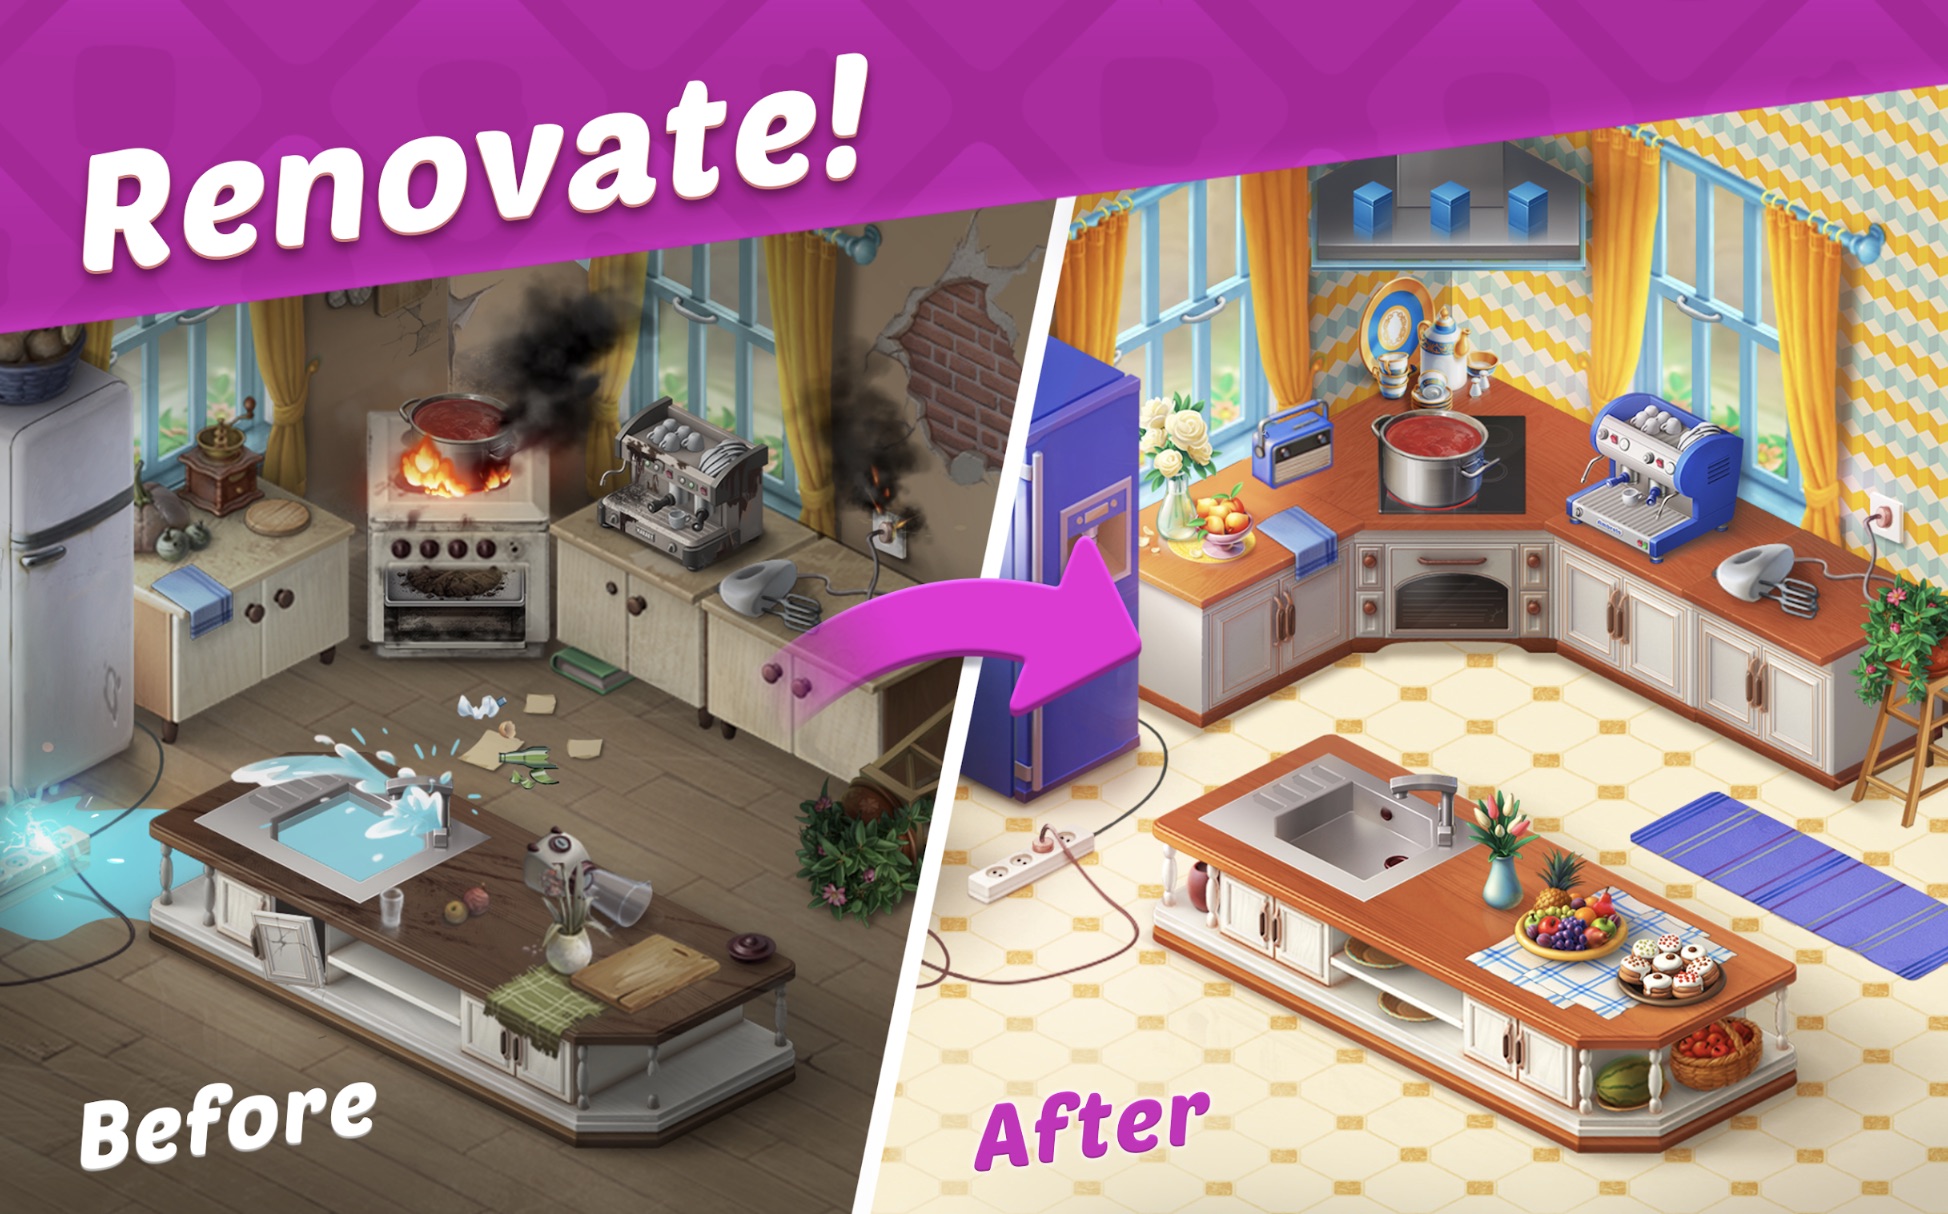 Match-3 home decor mobile game Homescapes has generated $1bn in